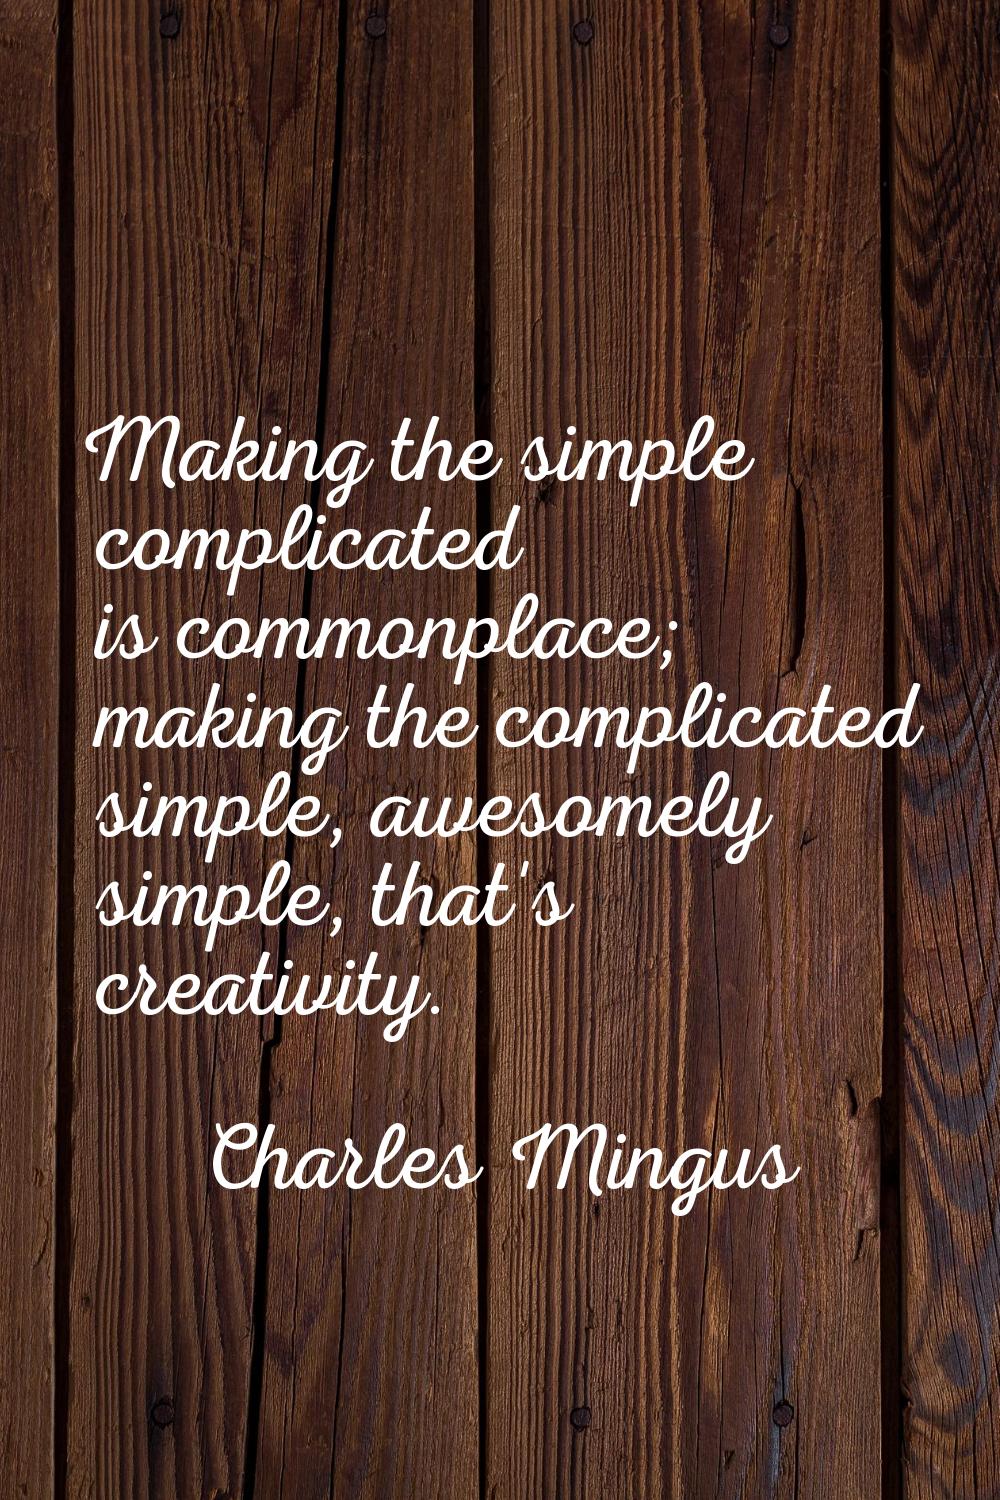 Making the simple complicated is commonplace; making the complicated simple, awesomely simple, that